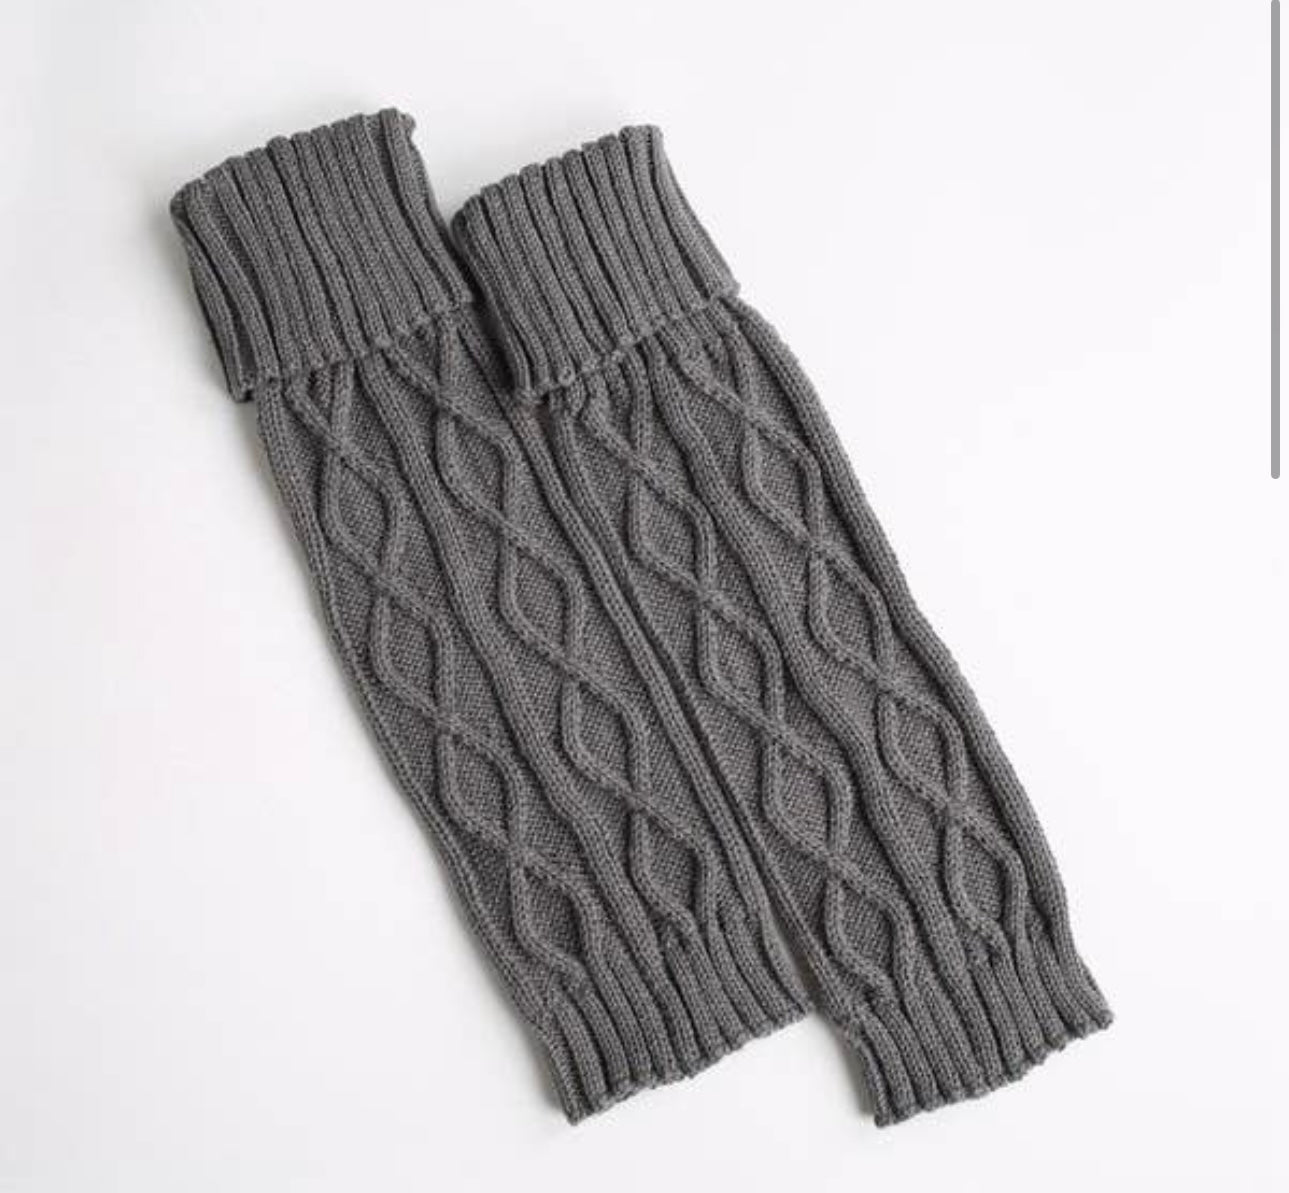 Introducing our Sweater Leg Warmers! Made with twisted knit, these Dandy Leg Warmers offer both warmth and style. Cozy up in your favorite leggings, uggs, and sweater combo with these grey leg warmers. Perfect for chilly days and fashionable outings.